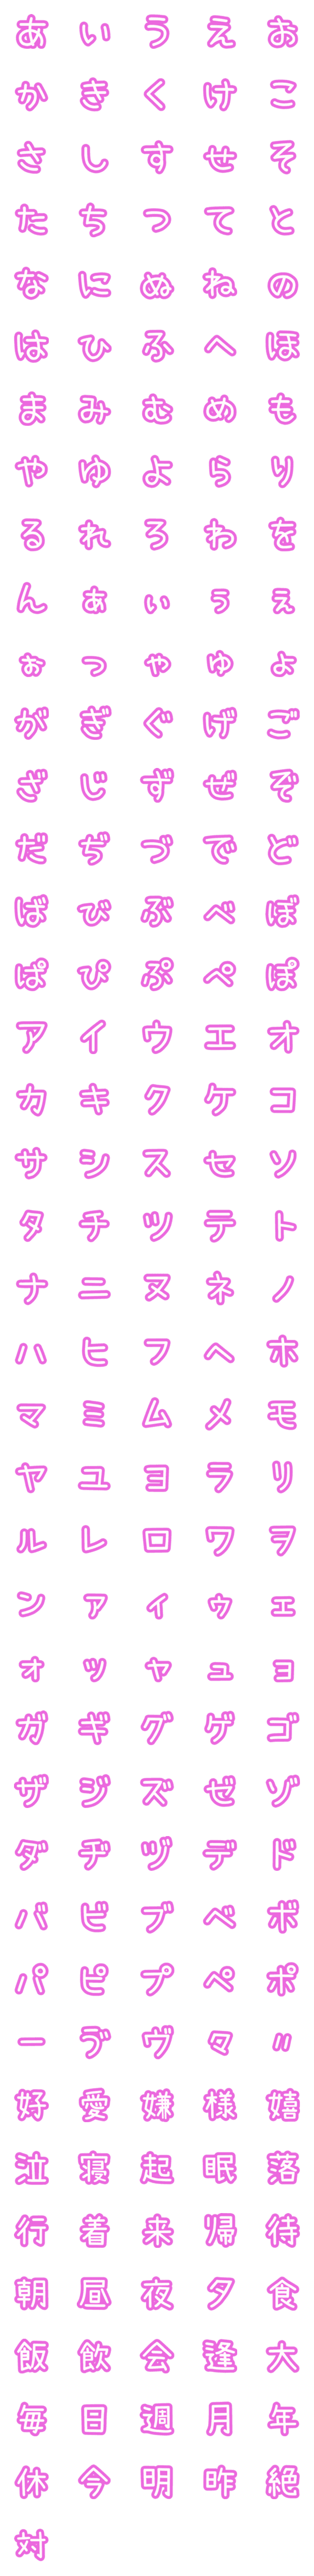 [LINE絵文字]ピンクなPOP文字の画像一覧